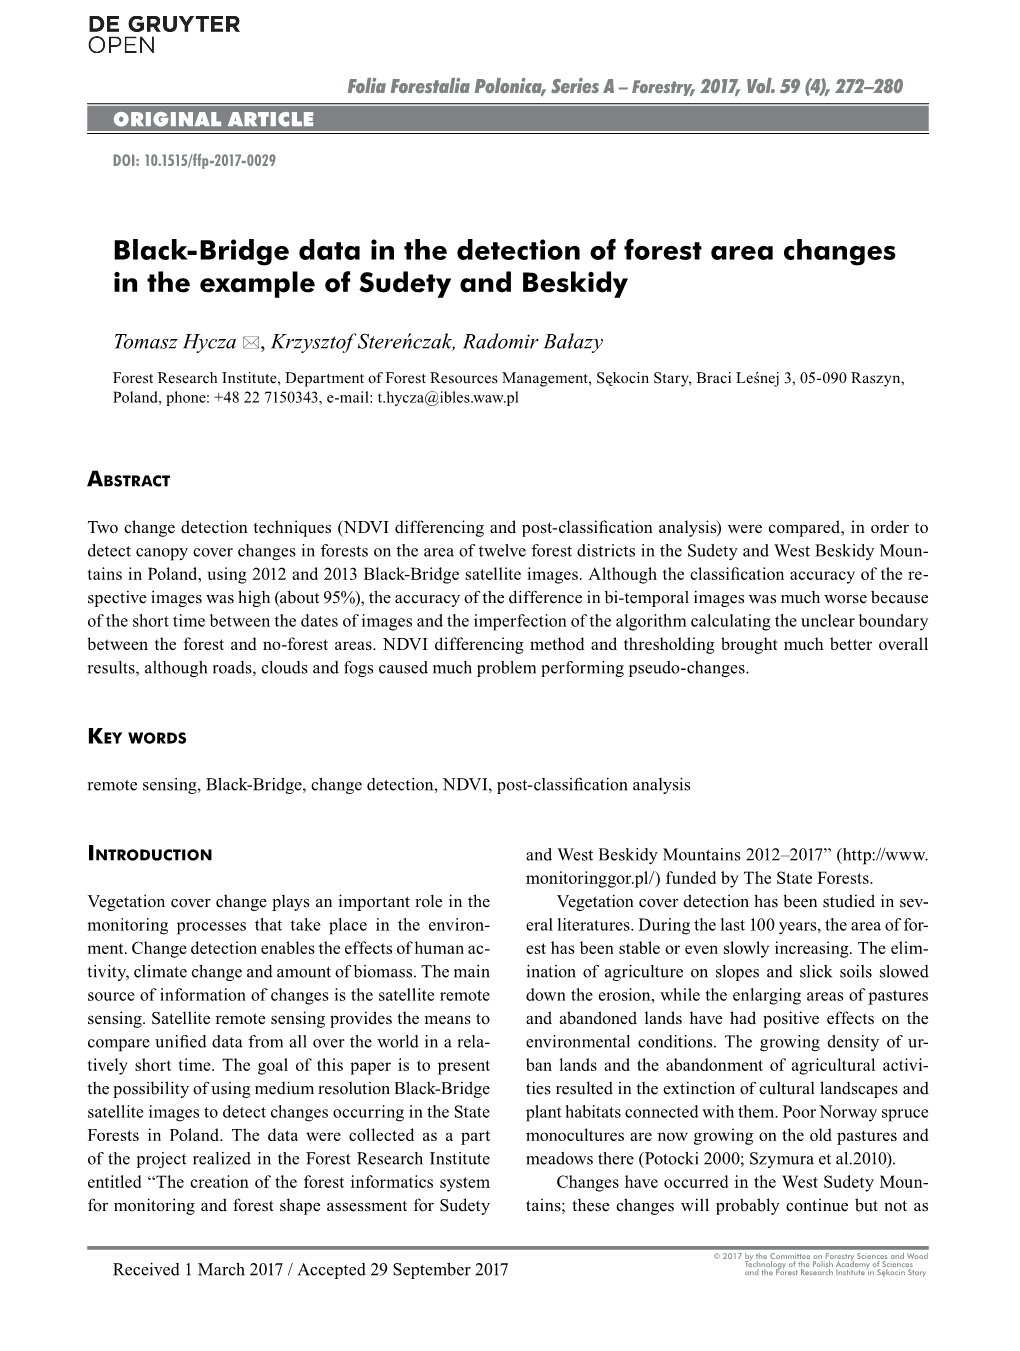 Black-Bridge Data in the Detection of Forest Area Changes in the Example of Sudety and Beskidy